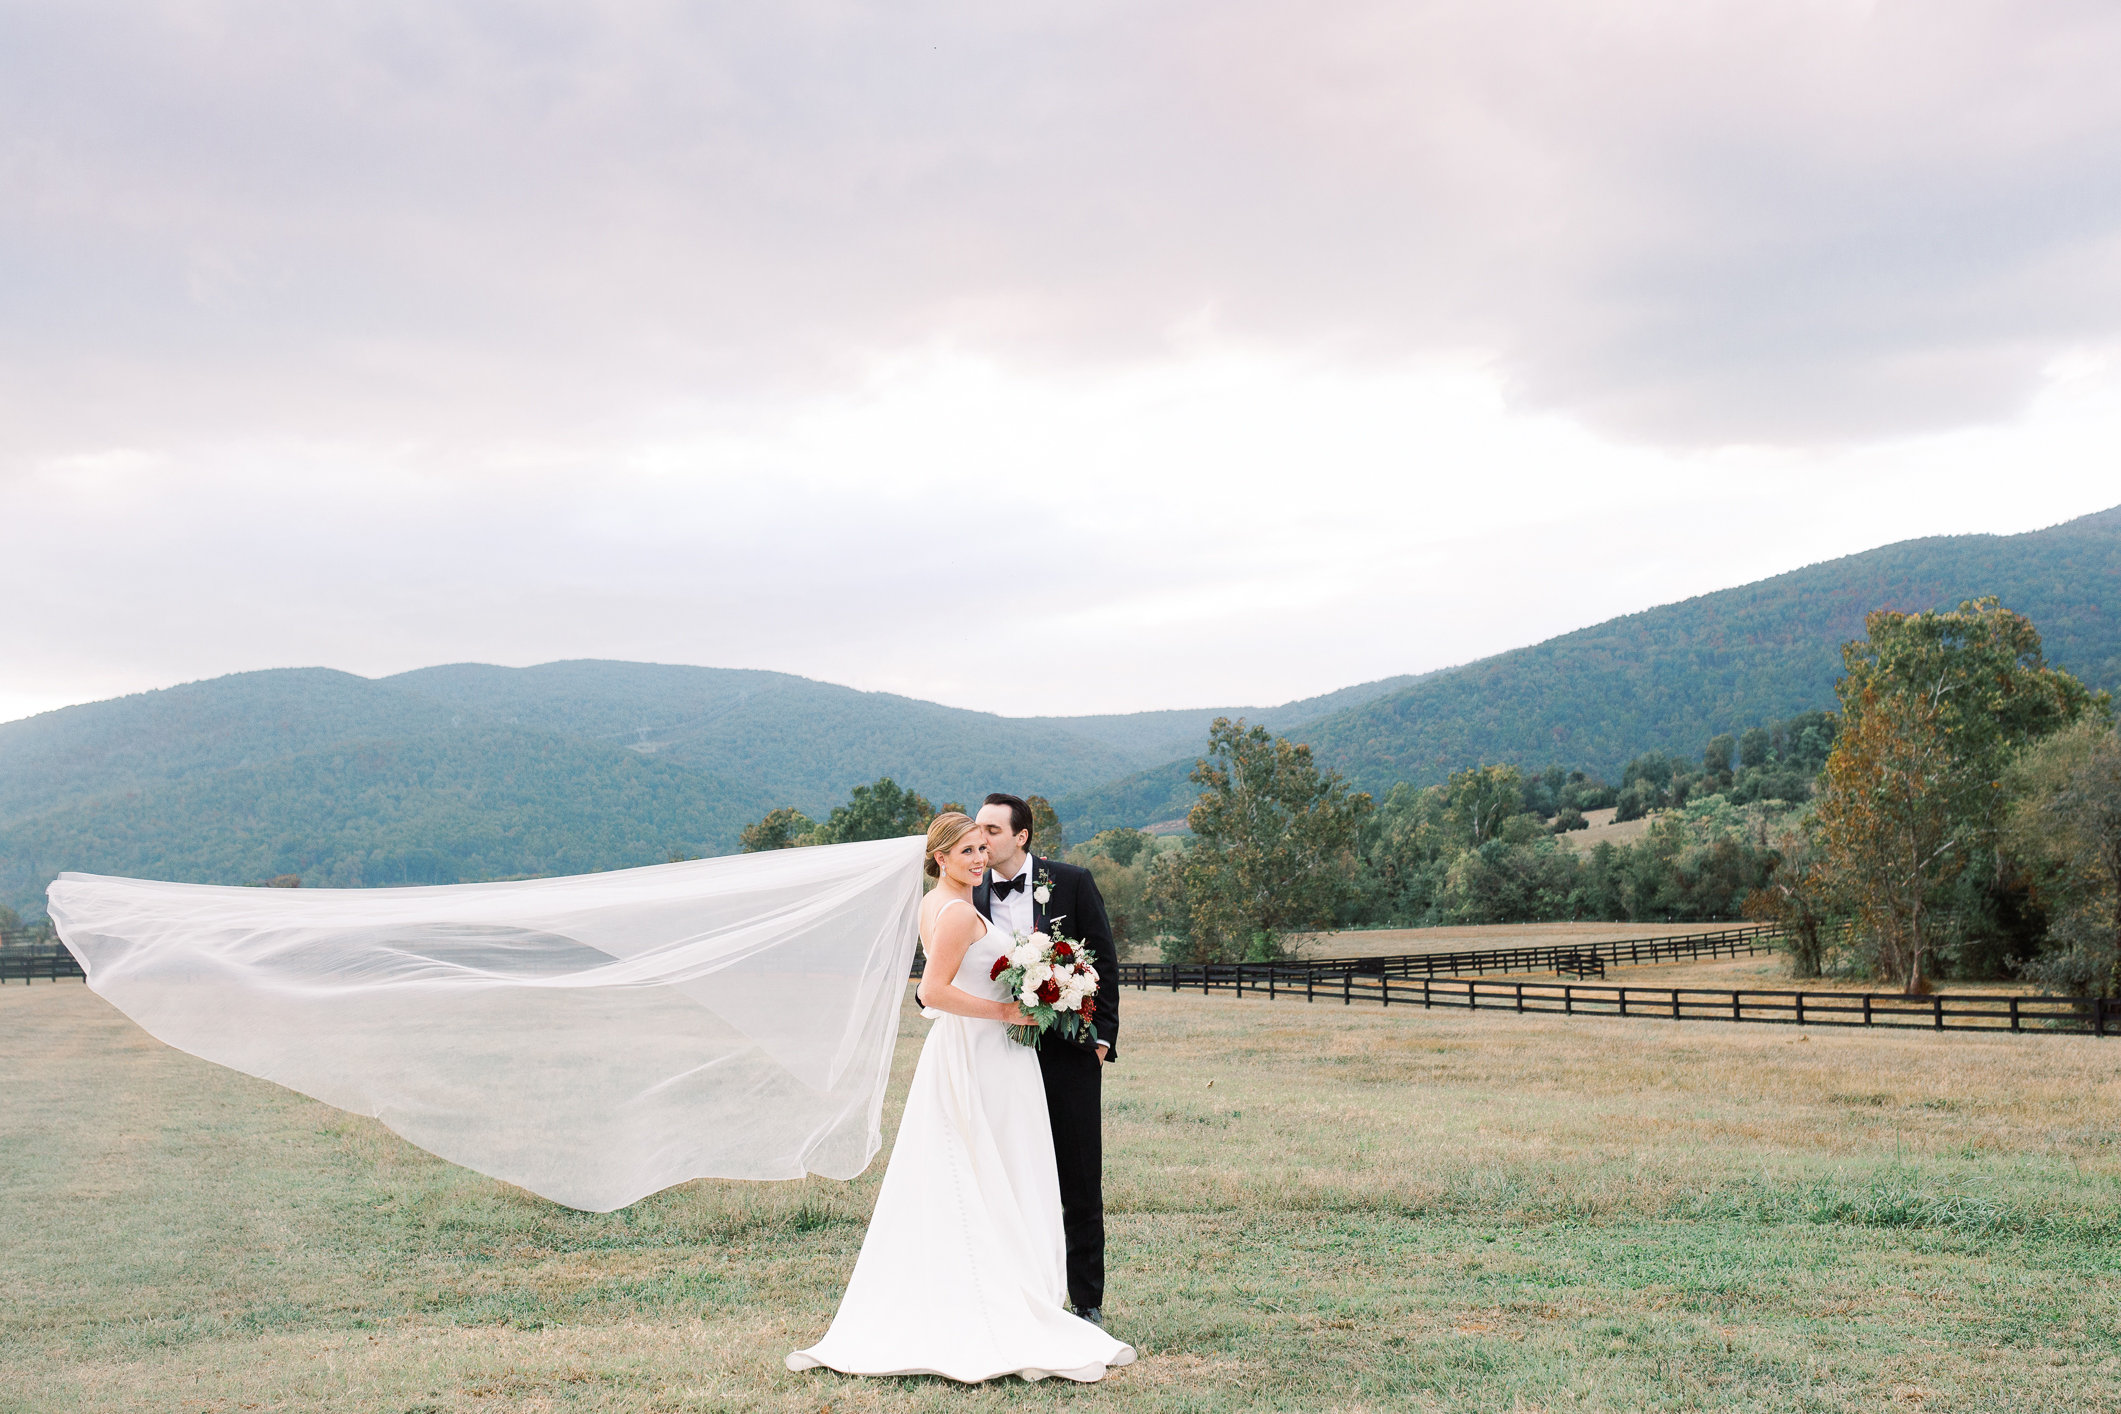 Virginia Vineyard Wedding with Shades of Red and Green